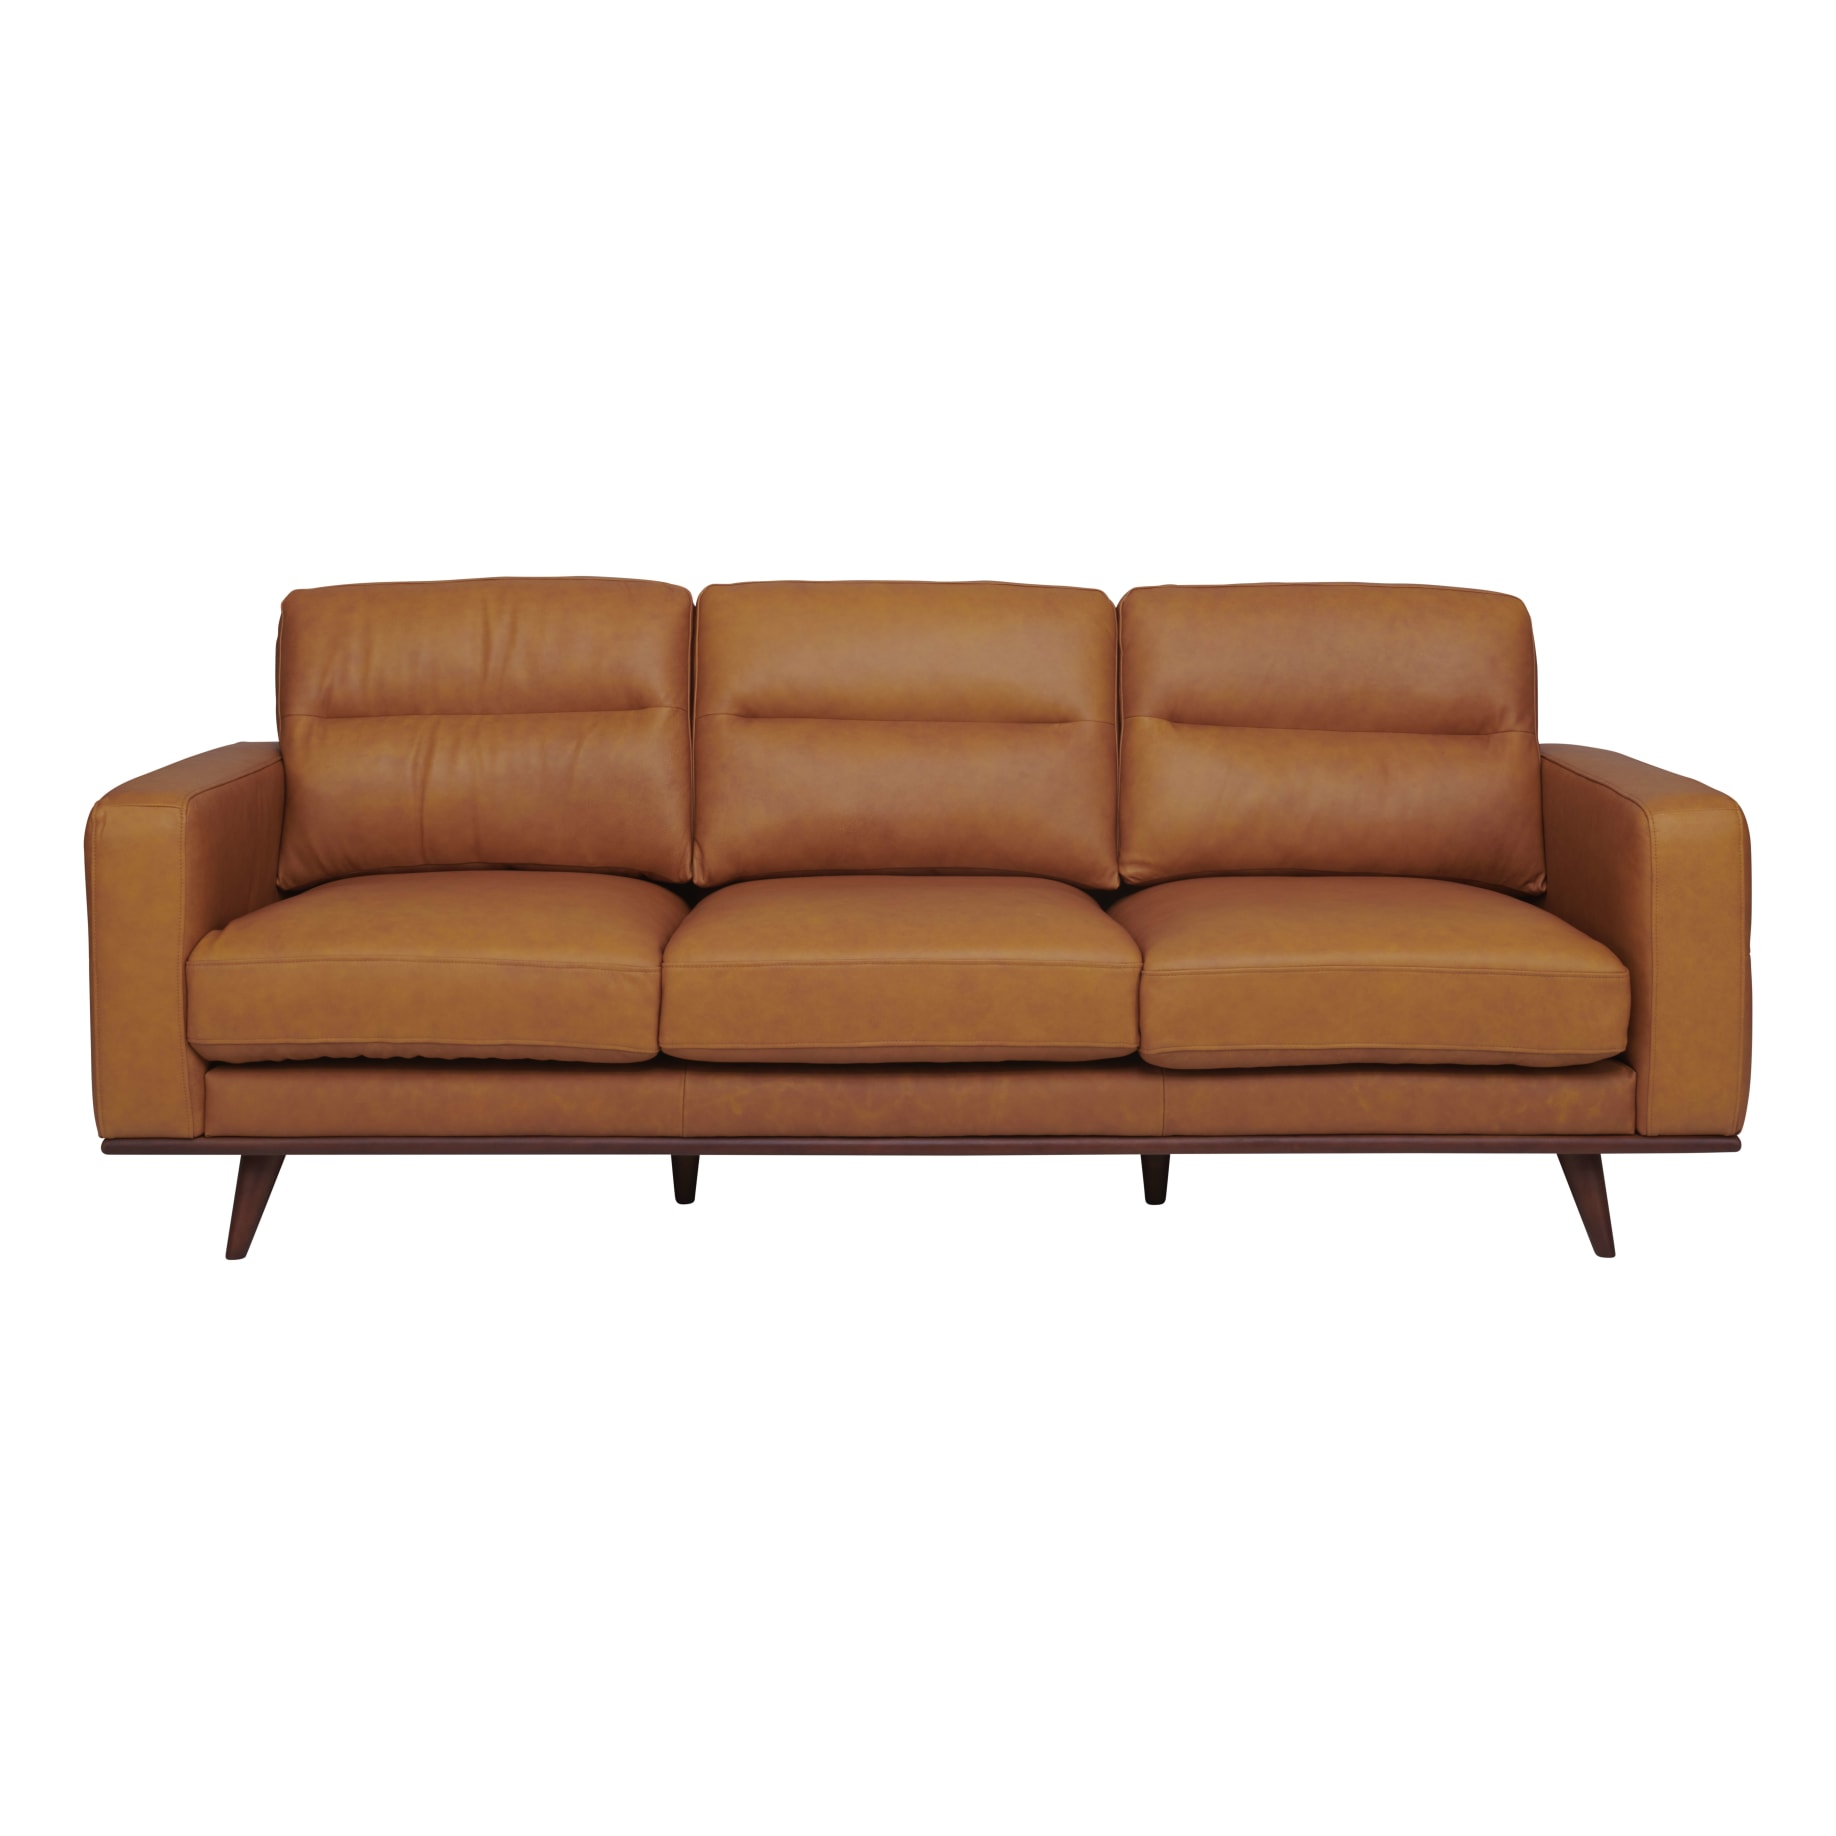 Astrid 3 Seater Sofa in Butler Leather Russet